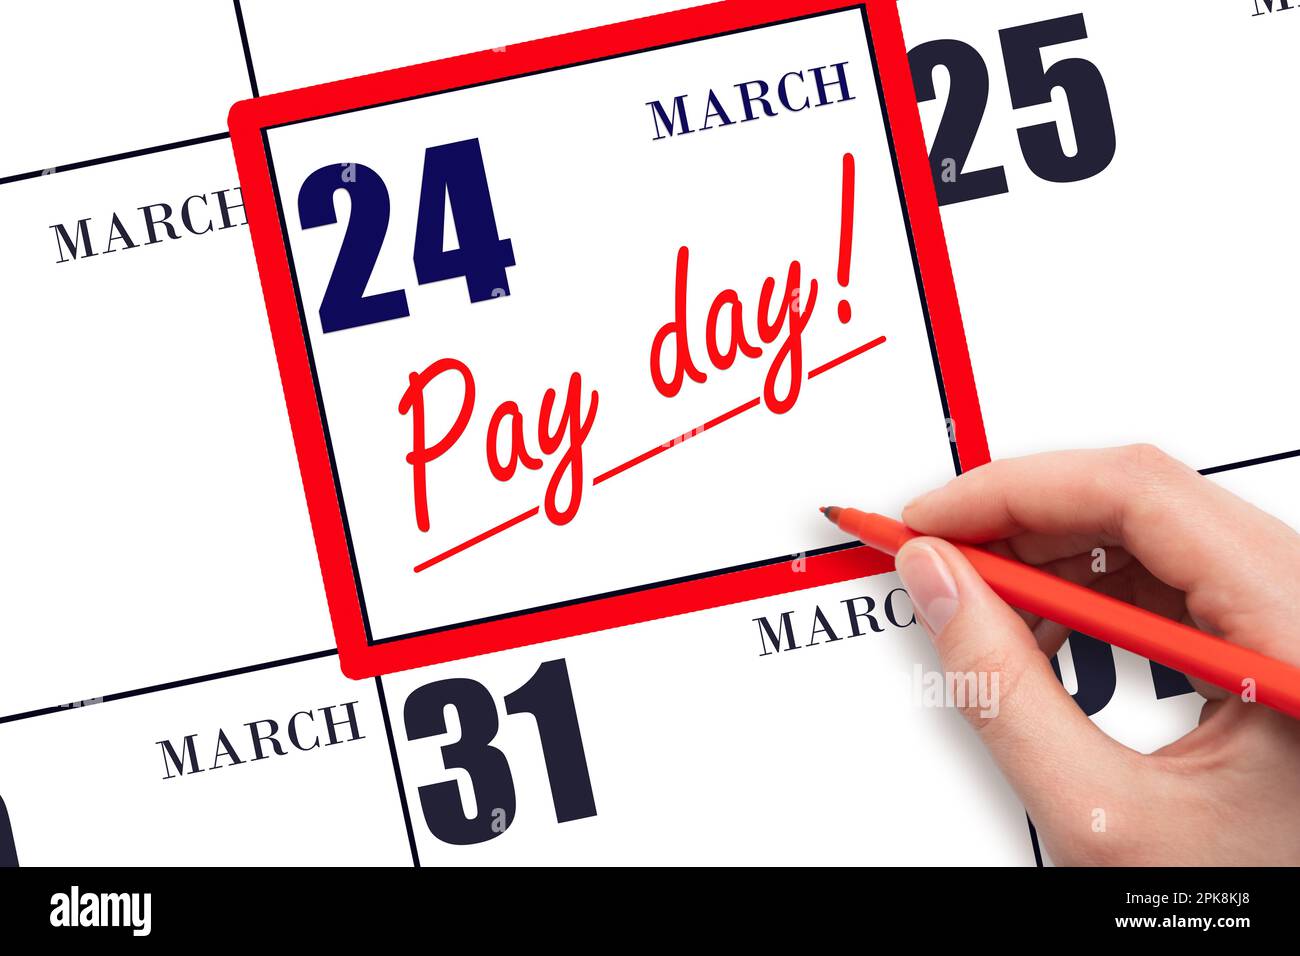 24th day of March. Hand writing text PAY DATE on calendar date March 24 and underline it. Payment due date. Reminder concept of payment. Spring month, Stock Photo